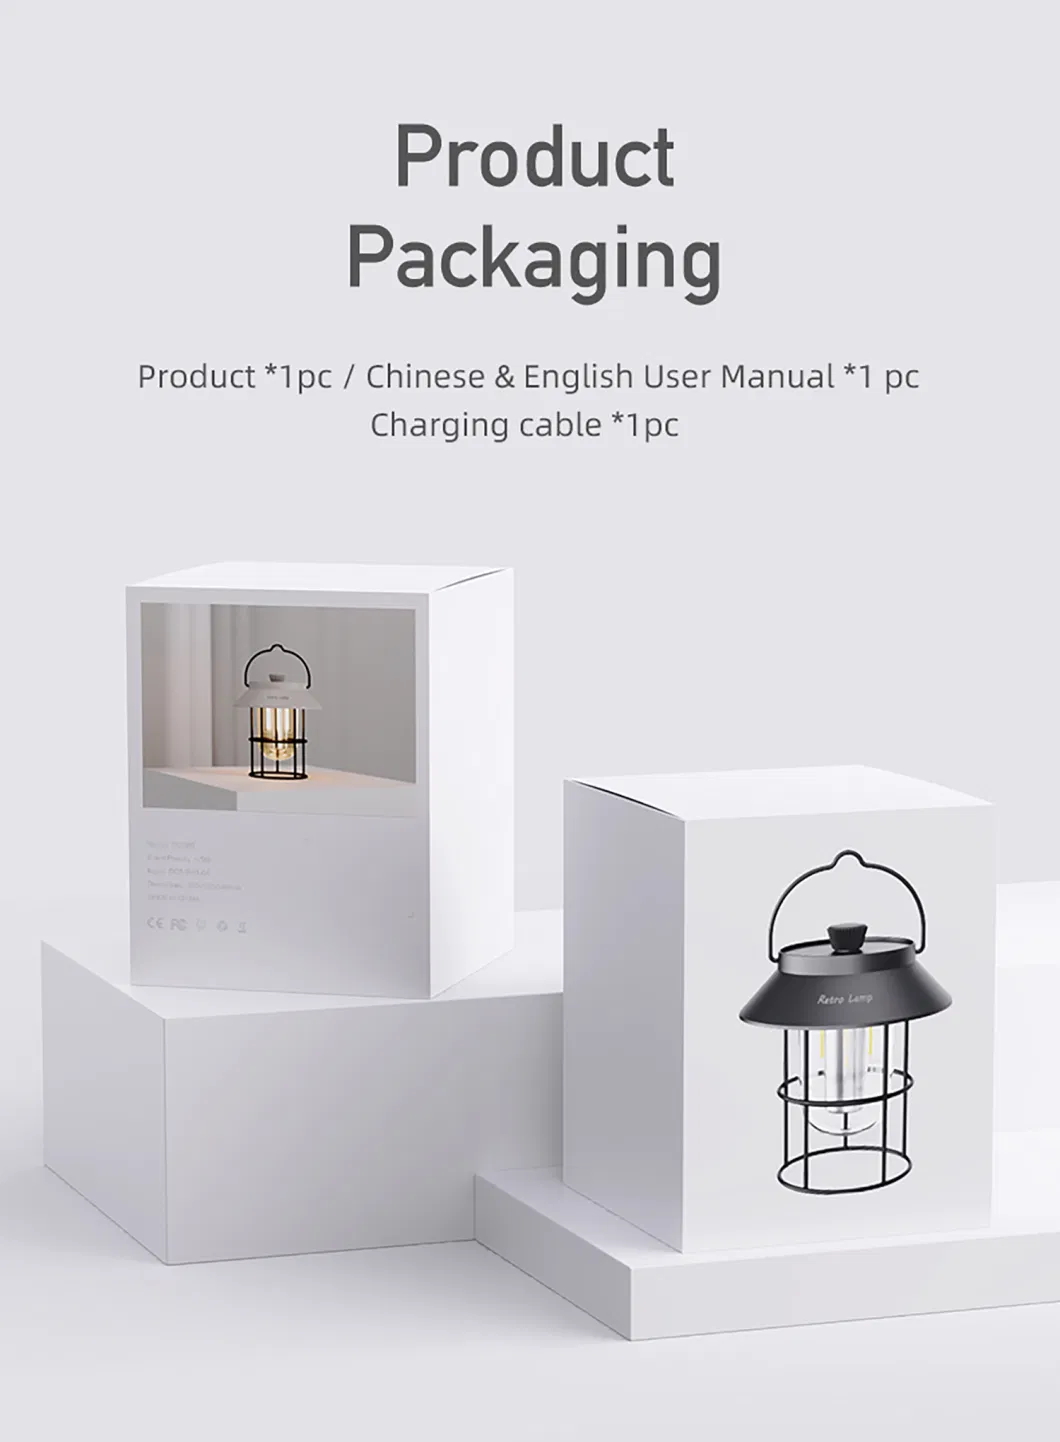 LED Lantern Light Outdoor Camping Lamp Tent Lamp USB Rechargeable Collapsible Emergency Light